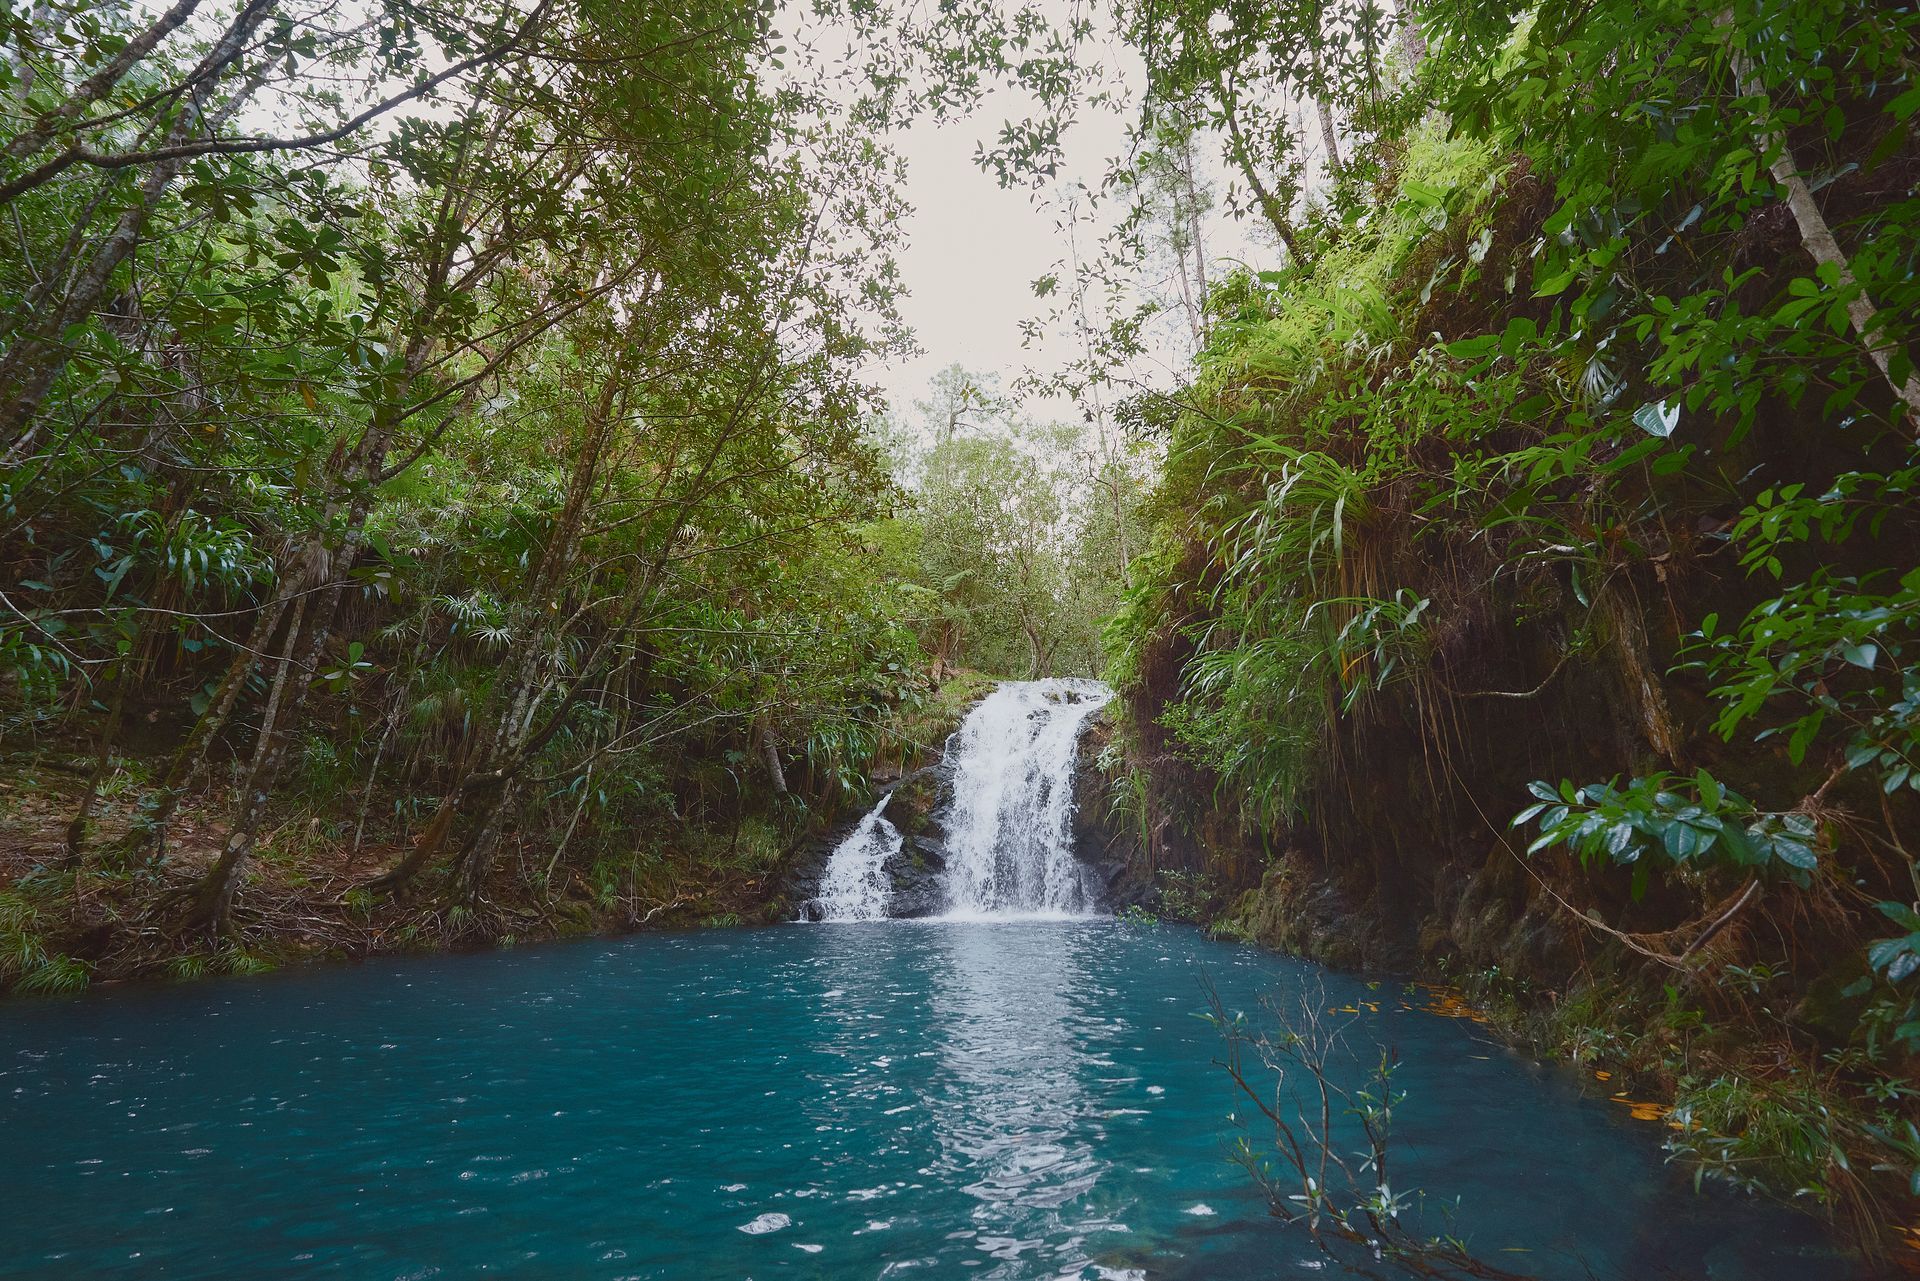 a small waterfall in the middle of a lush green forest surrounded by trees .